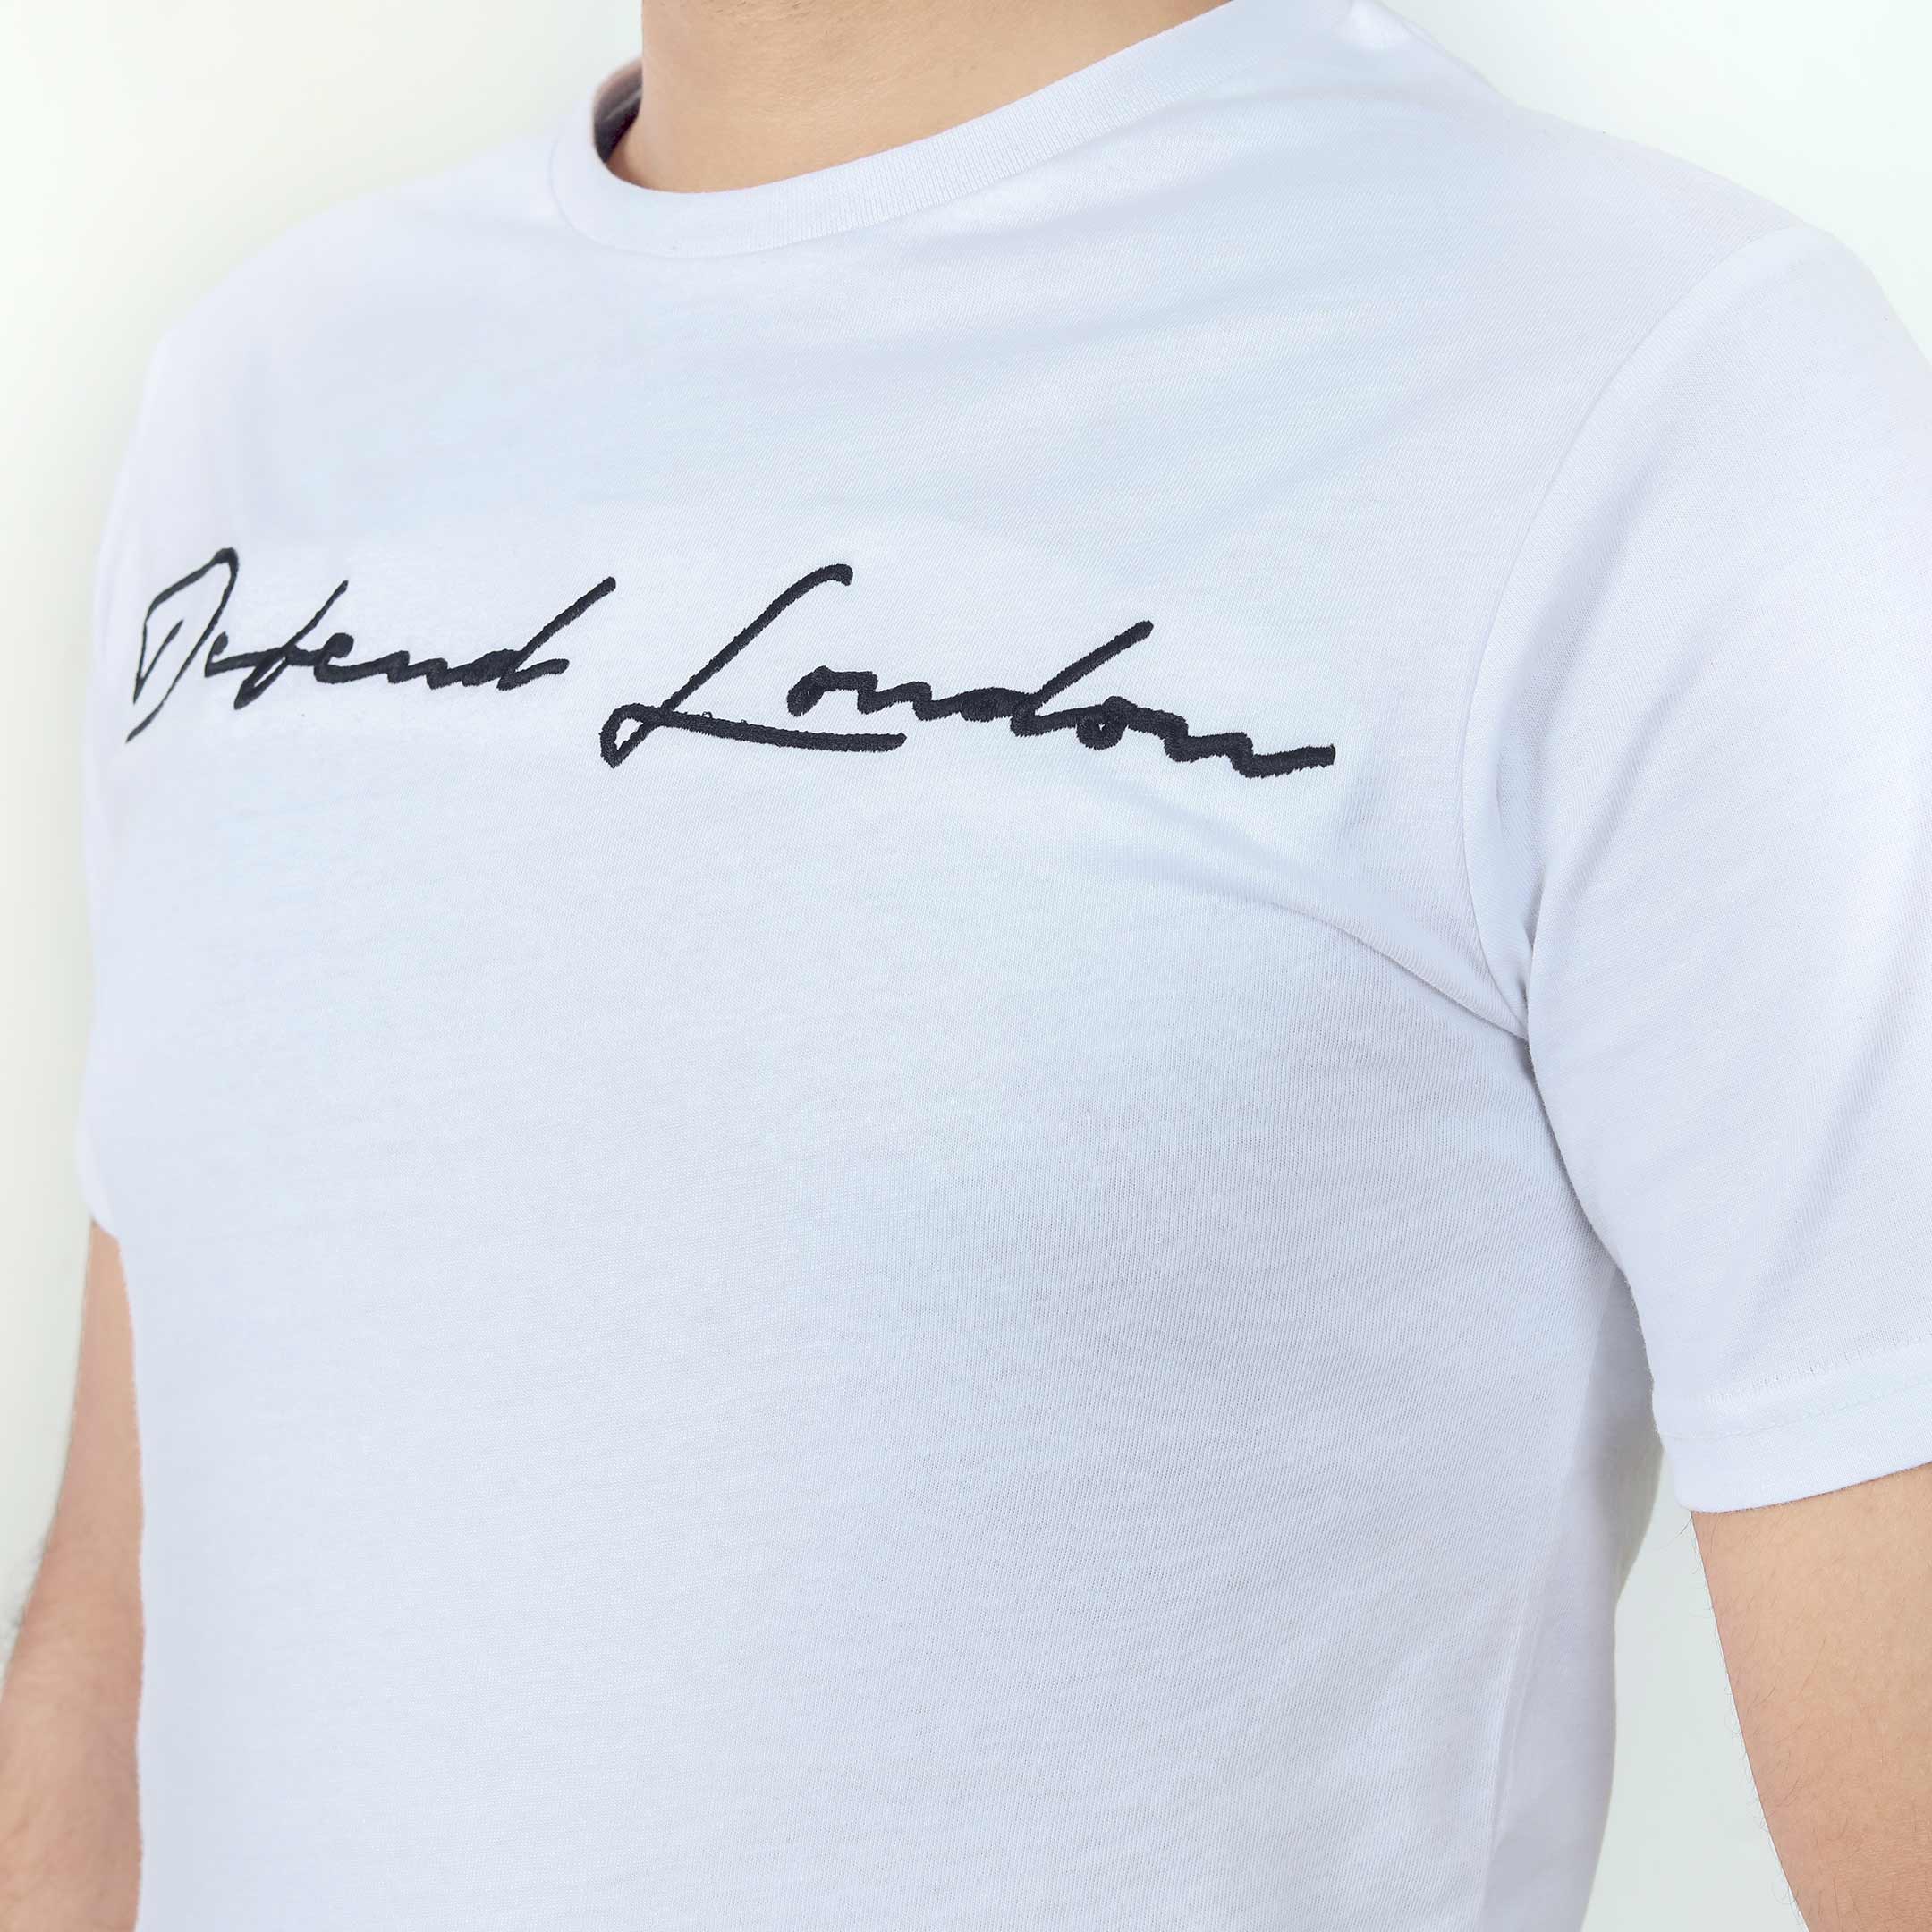 DFND Brand T-Shirt White With Signature